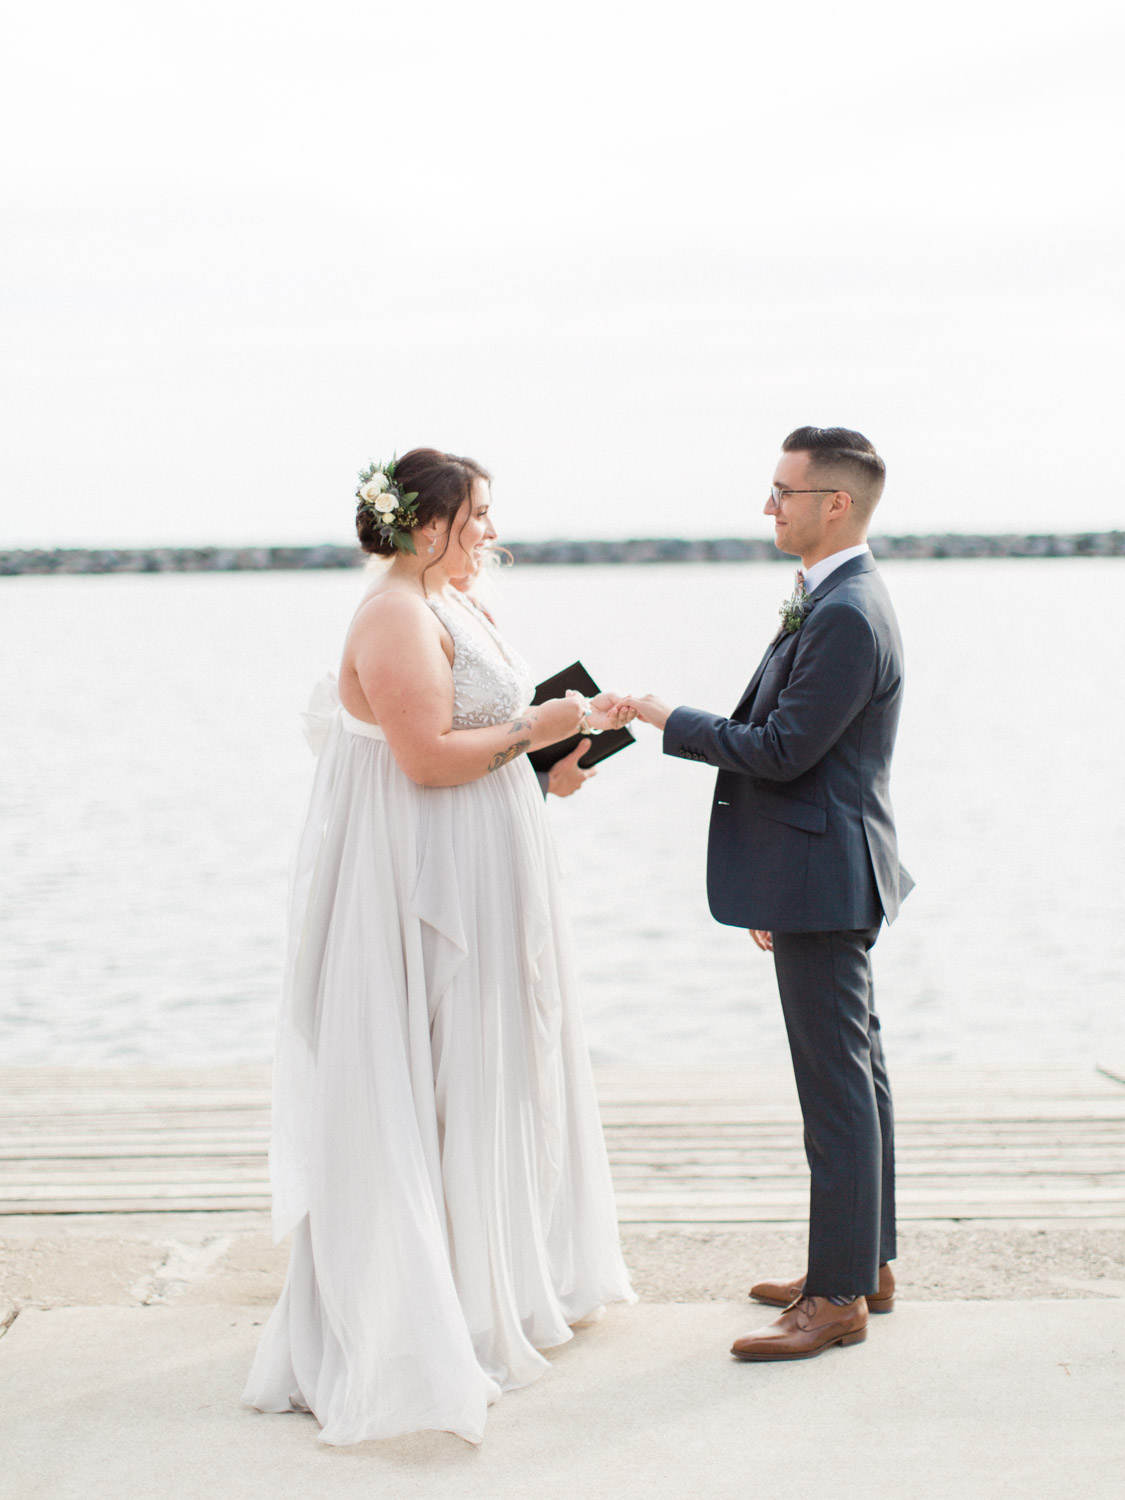 A contemporary wedding photograph in downtown Toronto at the Henley Room, Argonauts Rowing Club